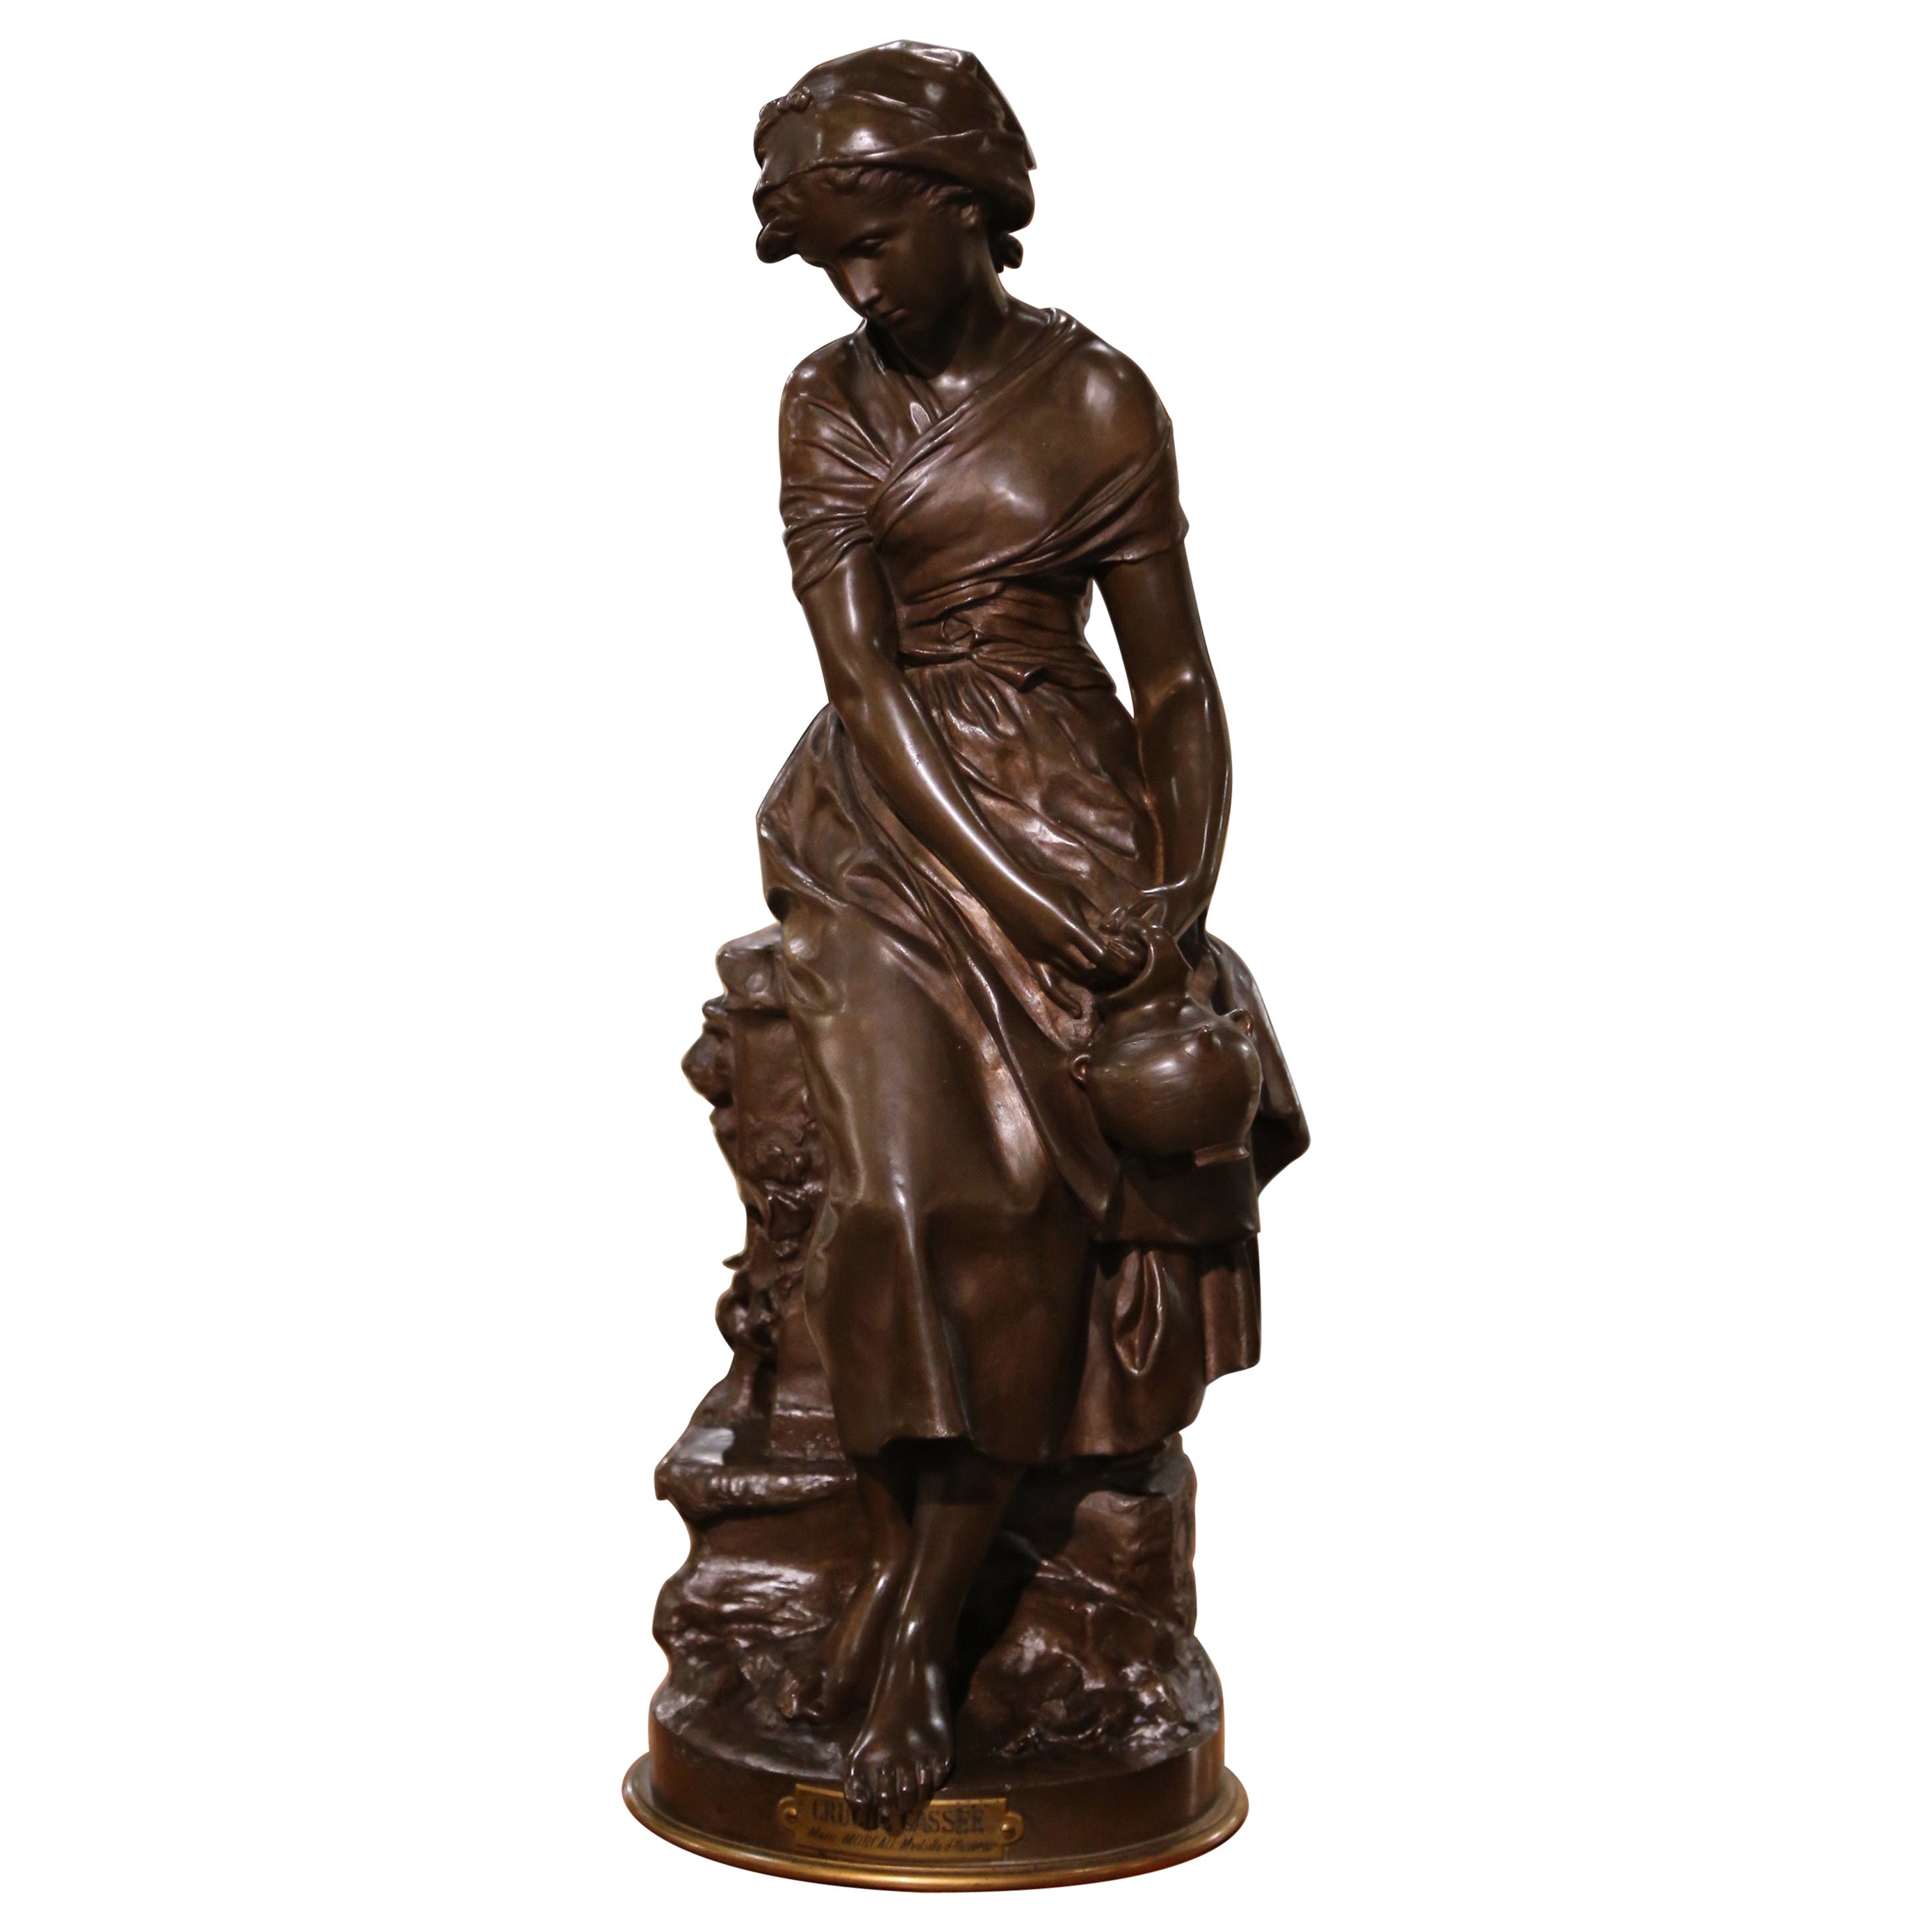 19th Century French Patinated Bronze Statue "La Cruche Cassee" Signed M. Moreau For Sale